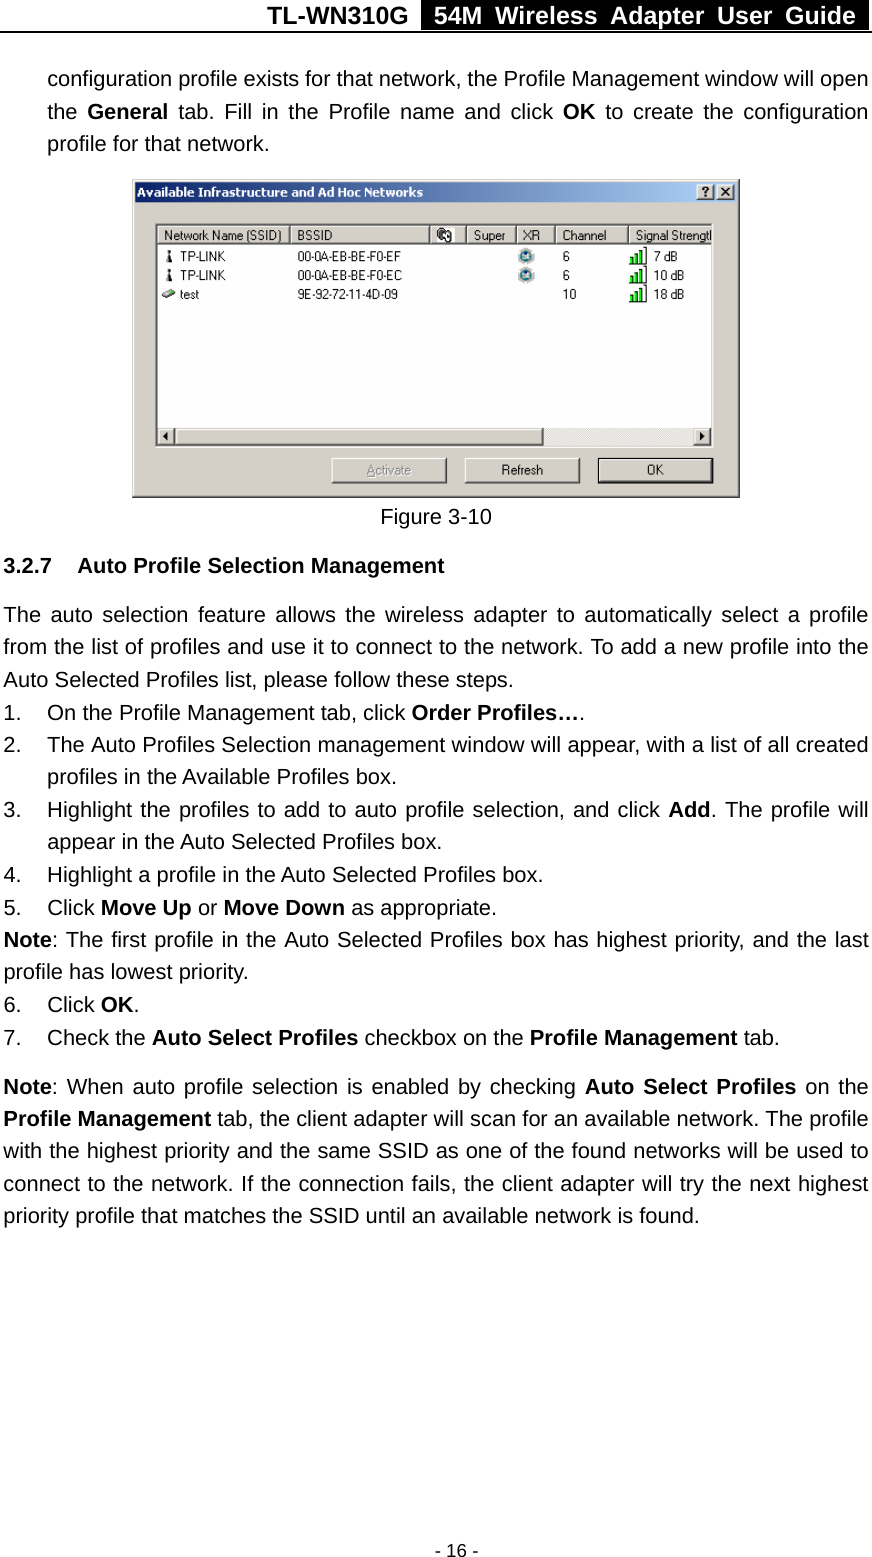 TL-WN310G   54M Wireless Adapter User Guide   - 16 -configuration profile exists for that network, the Profile Management window will open the  General tab. Fill in the Profile name and click OK to create the configuration profile for that network.  Figure 3-10   3.2.7  Auto Profile Selection Management The auto selection feature allows the wireless adapter to automatically select a profile from the list of profiles and use it to connect to the network. To add a new profile into the Auto Selected Profiles list, please follow these steps. 1.  On the Profile Management tab, click Order Profiles…. 2.  The Auto Profiles Selection management window will appear, with a list of all created profiles in the Available Profiles box. 3.  Highlight the profiles to add to auto profile selection, and click Add. The profile will appear in the Auto Selected Profiles box. 4.  Highlight a profile in the Auto Selected Profiles box. 5. Click Move Up or Move Down as appropriate. Note: The first profile in the Auto Selected Profiles box has highest priority, and the last profile has lowest priority. 6. Click OK. 7. Check the Auto Select Profiles checkbox on the Profile Management tab. Note: When auto profile selection is enabled by checking Auto Select Profiles on the Profile Management tab, the client adapter will scan for an available network. The profile with the highest priority and the same SSID as one of the found networks will be used to connect to the network. If the connection fails, the client adapter will try the next highest priority profile that matches the SSID until an available network is found. 